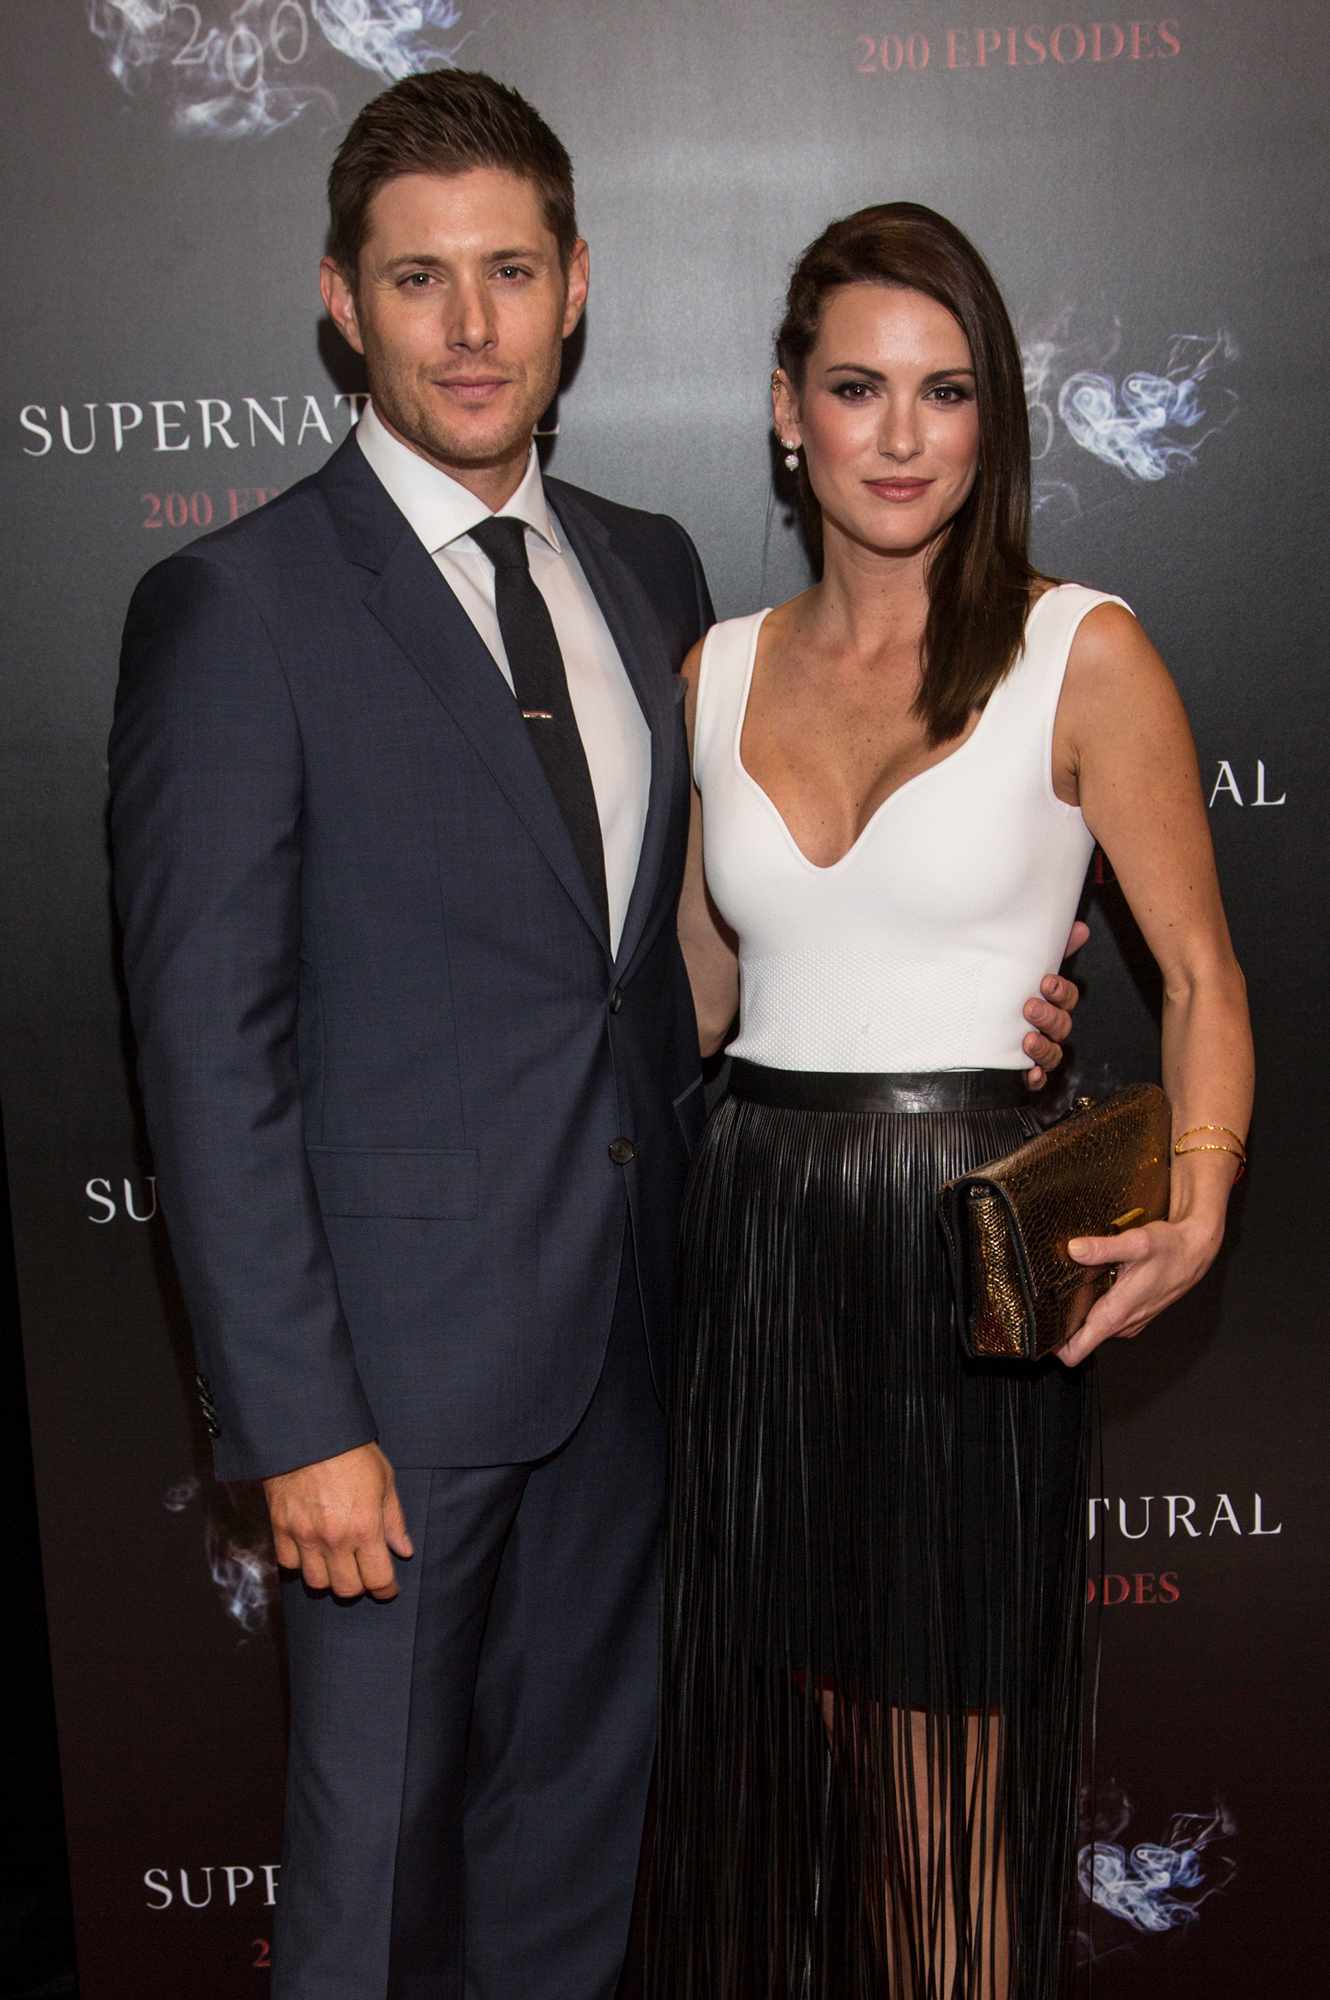 Jensen Ackles and Danneel Ackles attend the "Supernatural" 200th episode celebration at the Fairmont Pacific Rim Hotel on October 18, 2014 in Vancouver, CanadaJensen Ackles and Danneel Ackles attend the "Supernatural" 200th episode celebration at the Fairmont Pacific Rim Hotel on October 18, 2014 in Vancouver, Canada